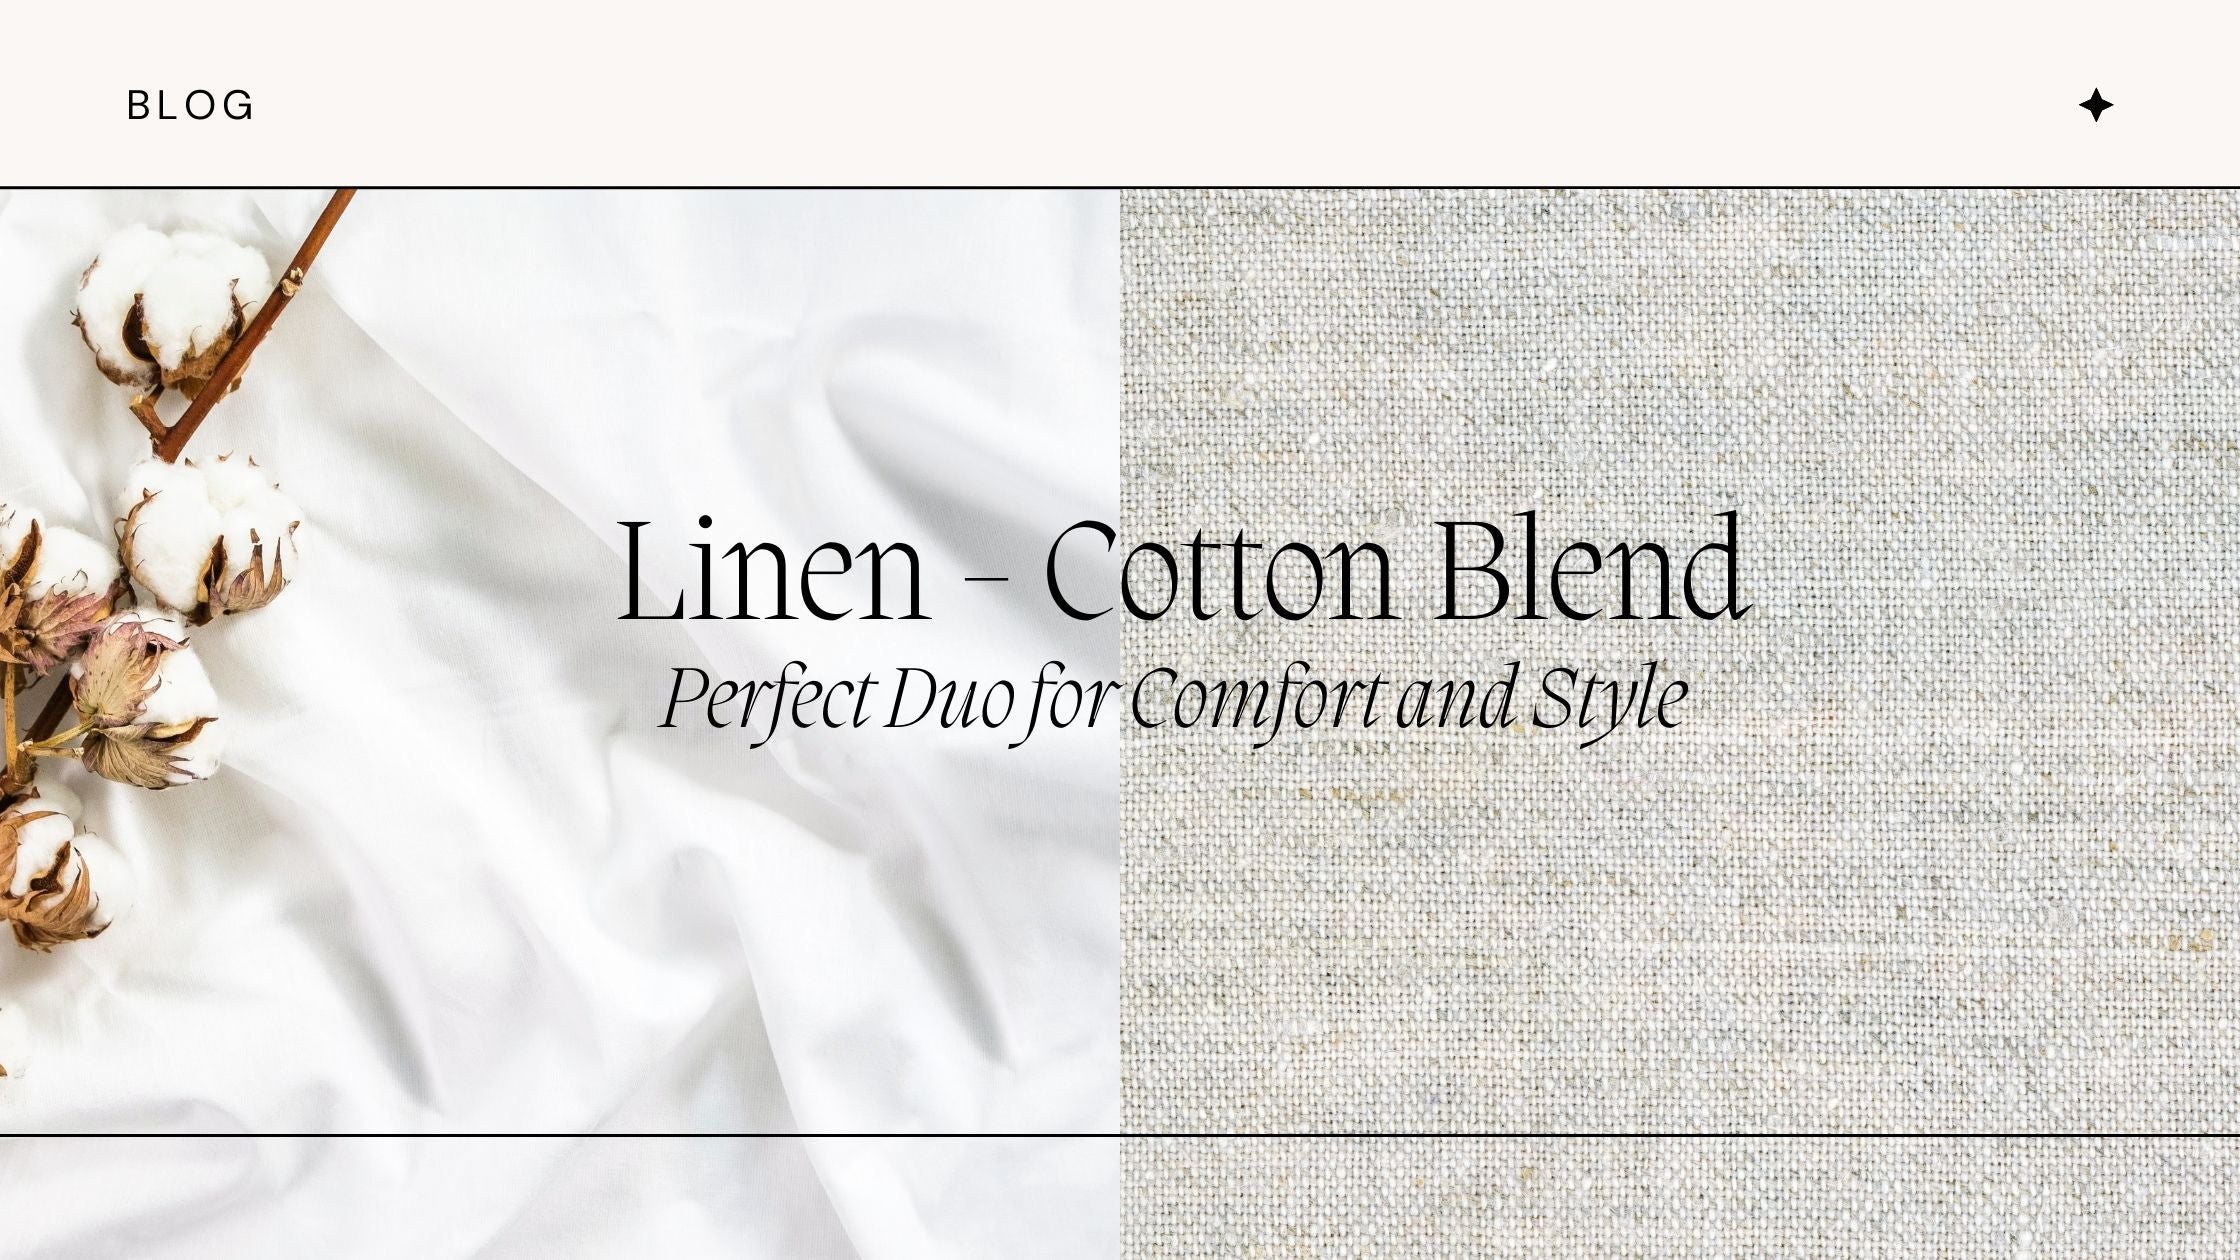 Why Linen and Cotton Blend Fabric are the Perfect Duo for Comfort and Style